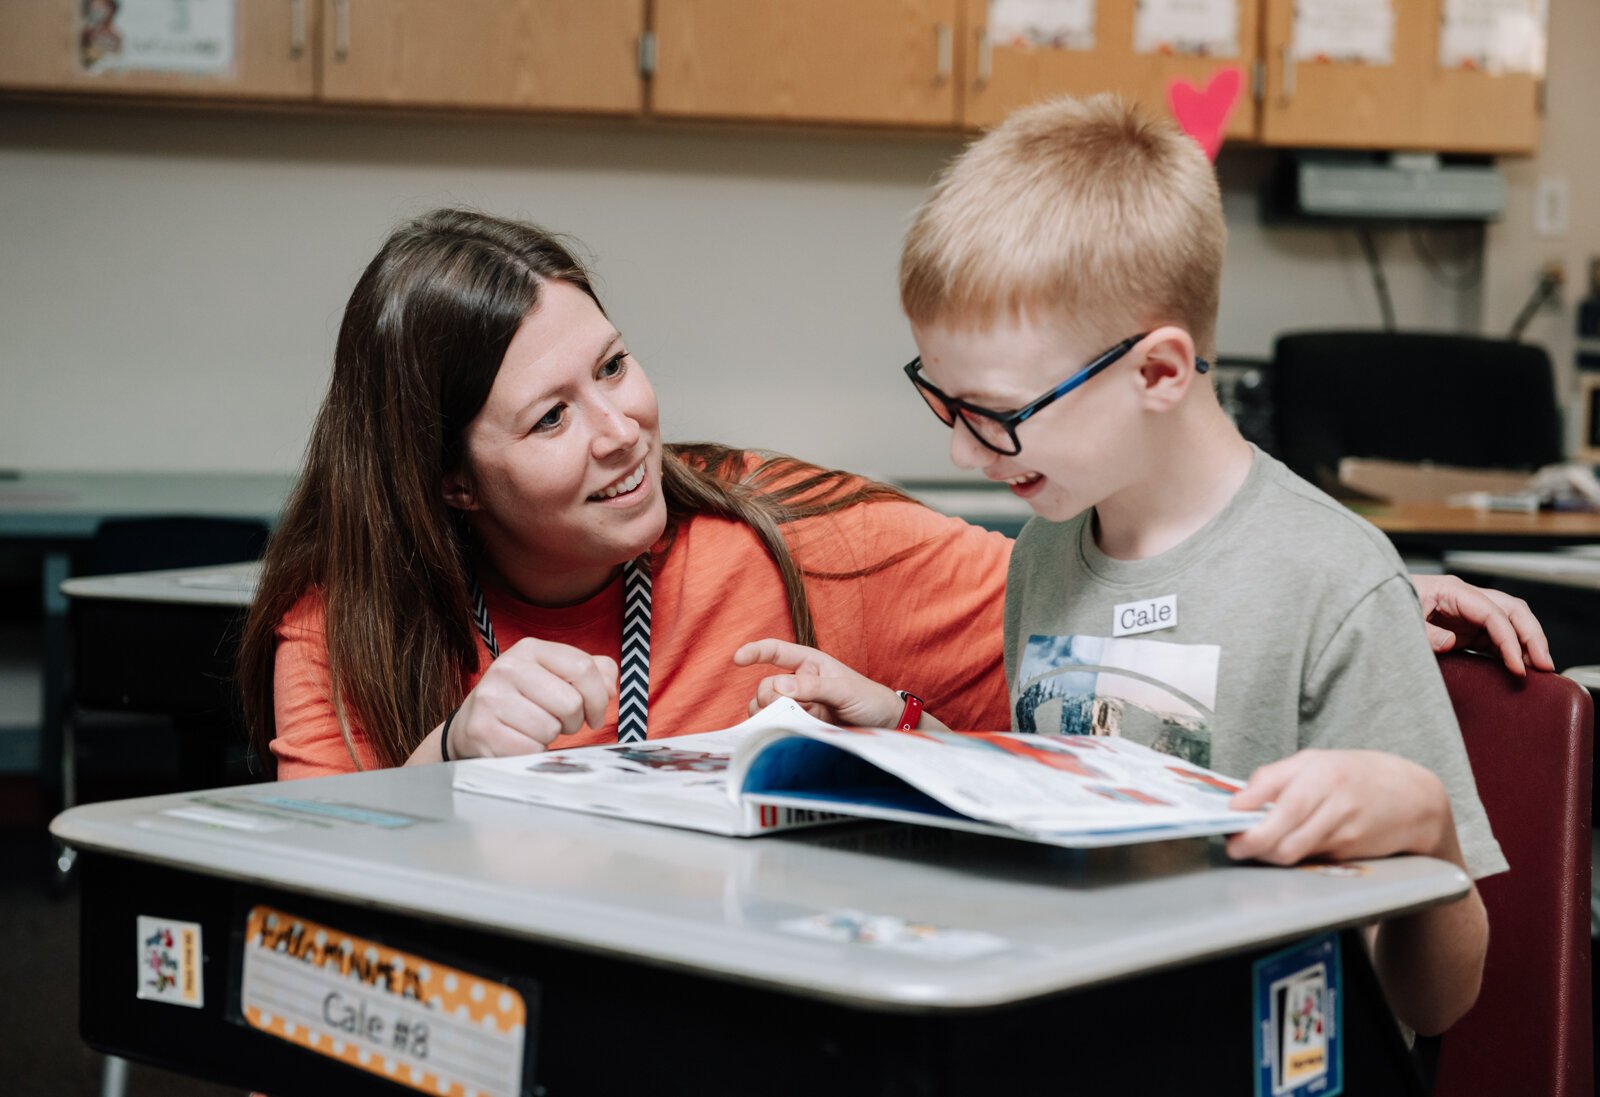 Teacher Stacey Fry helps student Cale Lundquist during reading time in her class at O J Neighbours Elementary School in Wabash.